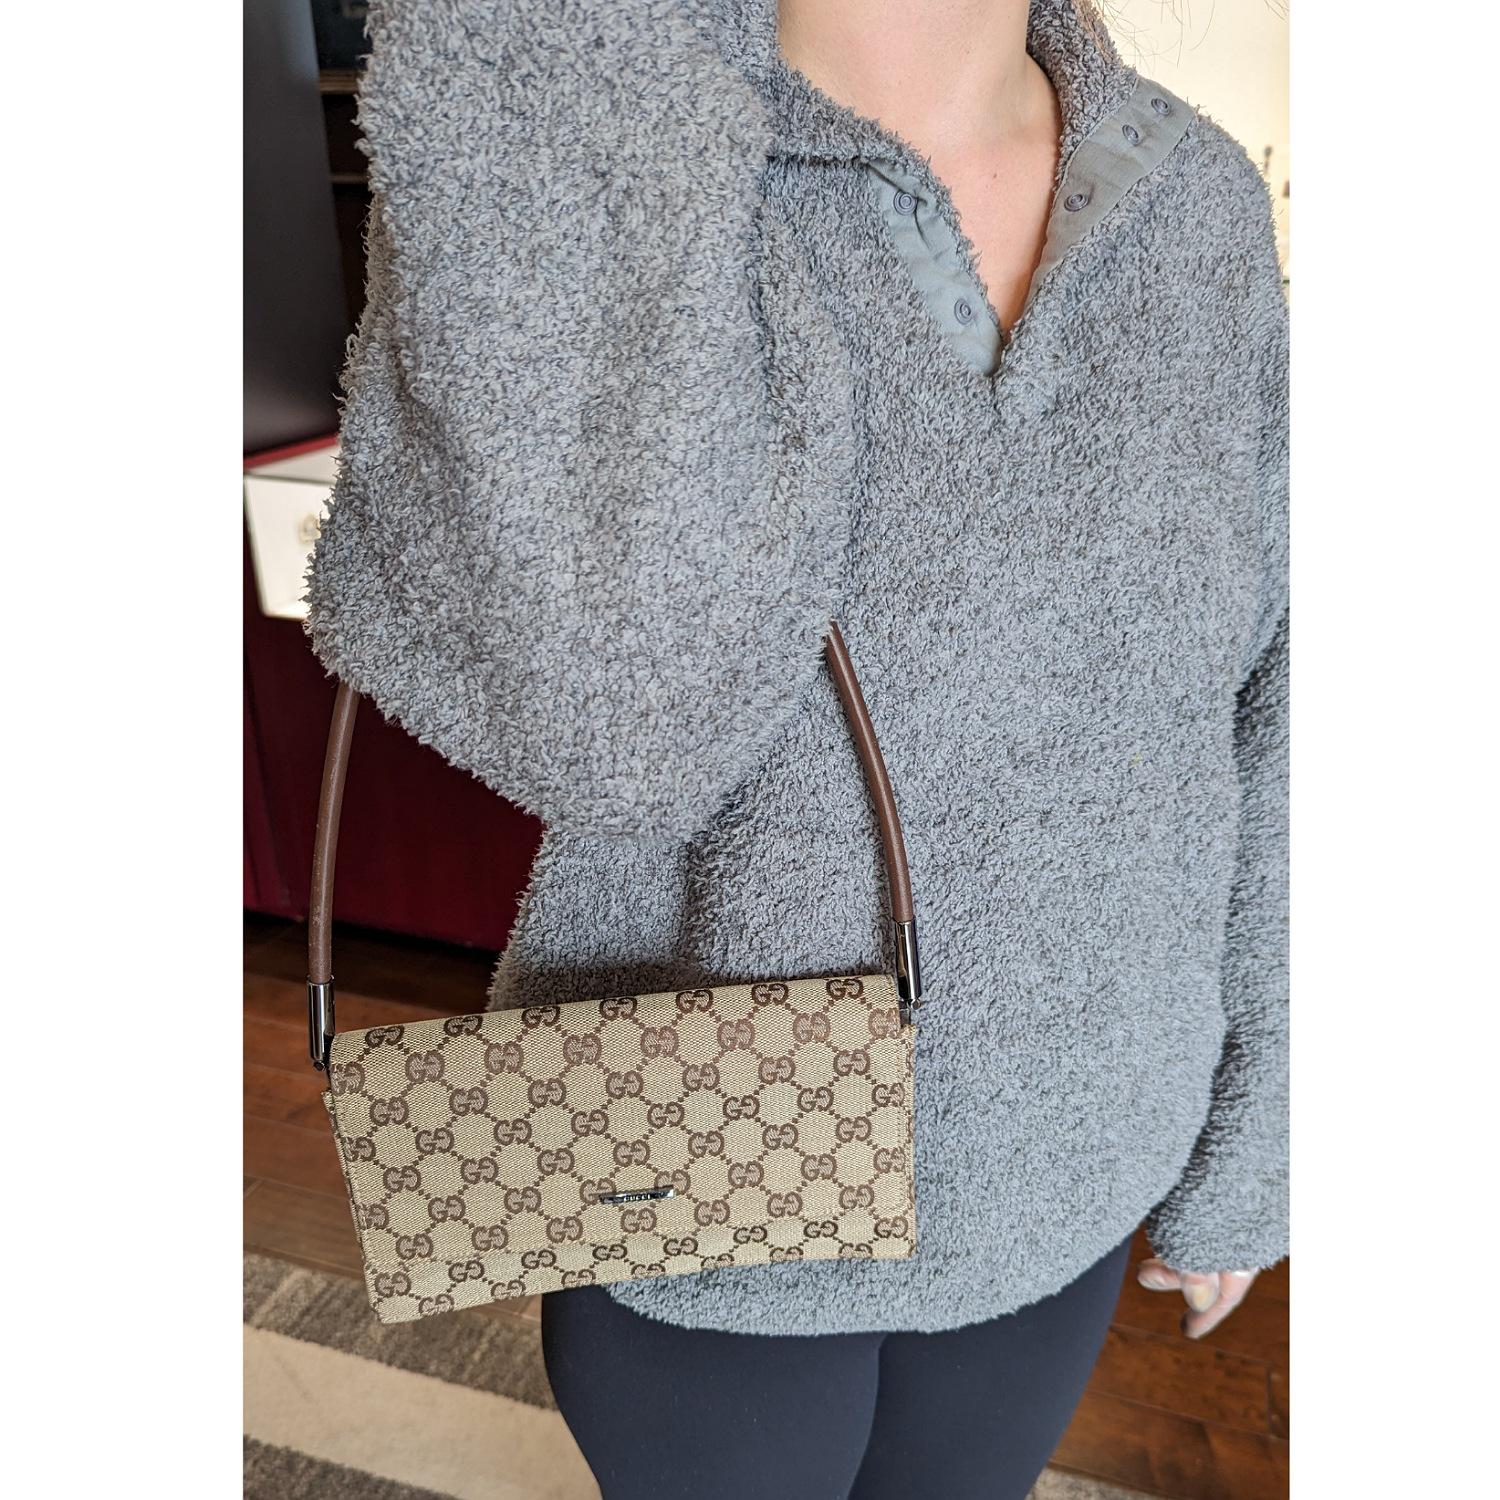 This chic handbag is finely crafted of Gucci GG monogram fabric canvas in beige with brown. The shoulder bag features a brown leather strap, leather piping, and silver-tone hardware. The flap opens to a partitioned brown fabric interior.

Designer: